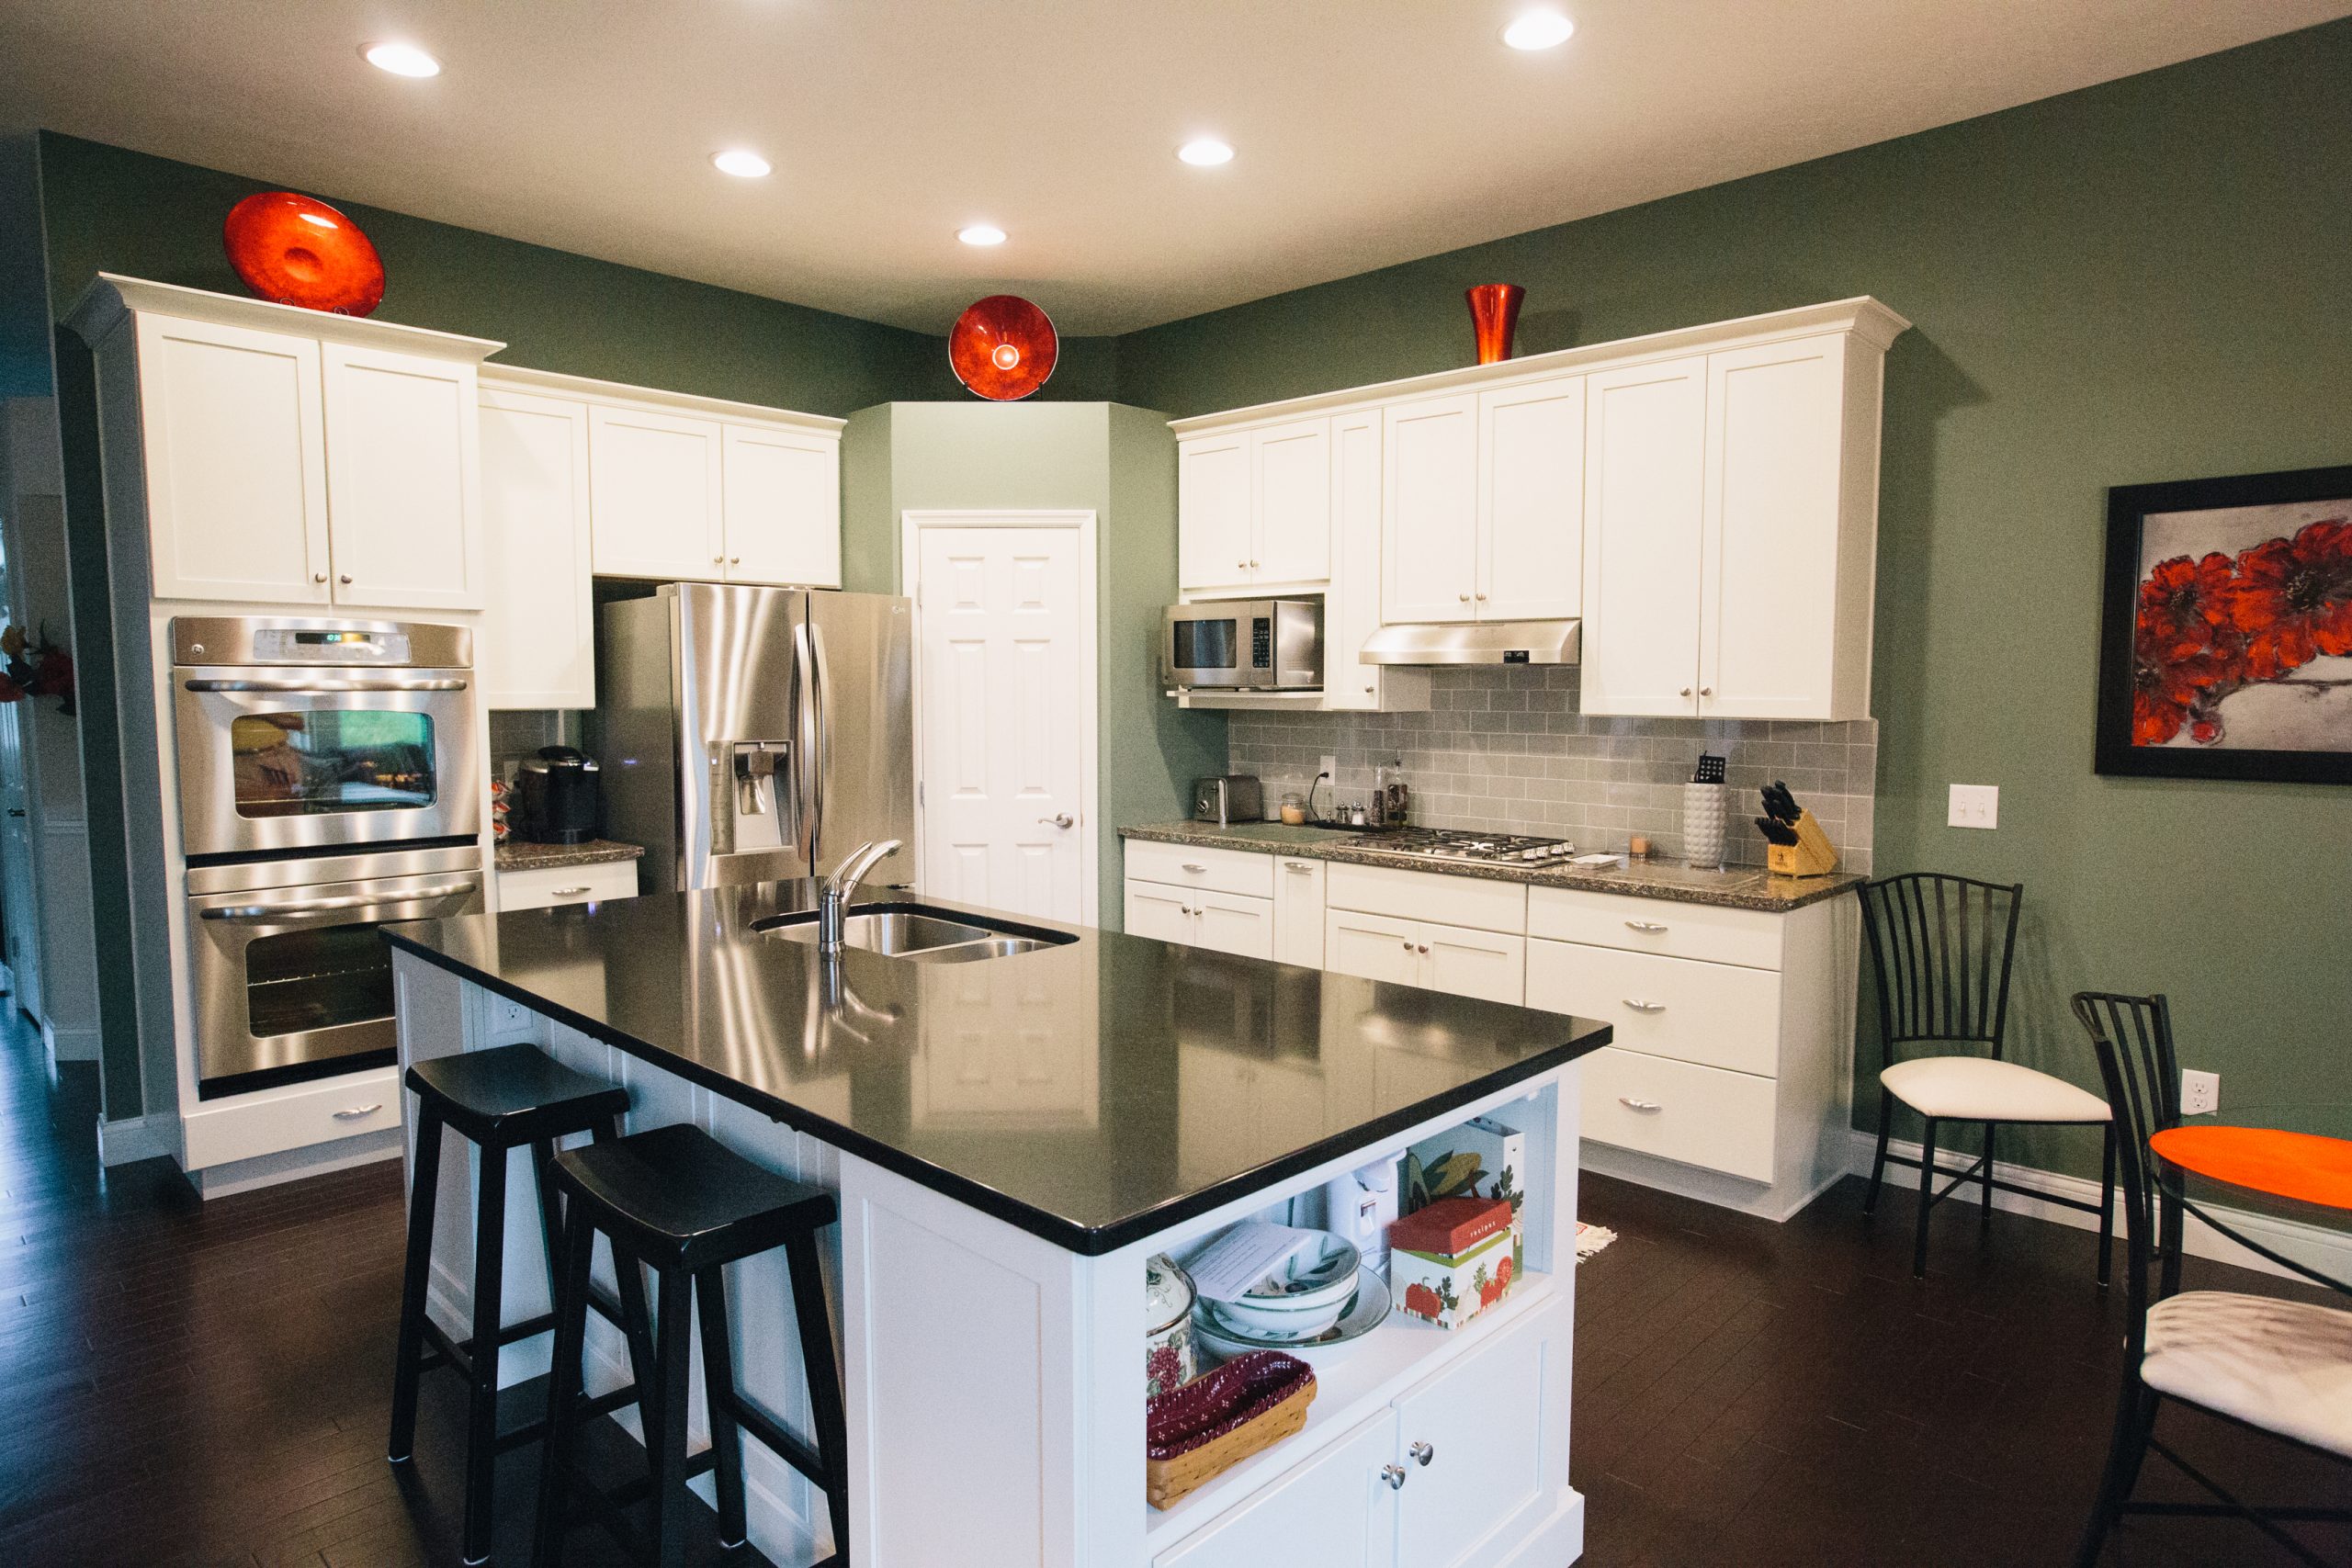 Green paint colors like sage give kitchens a natural feel.